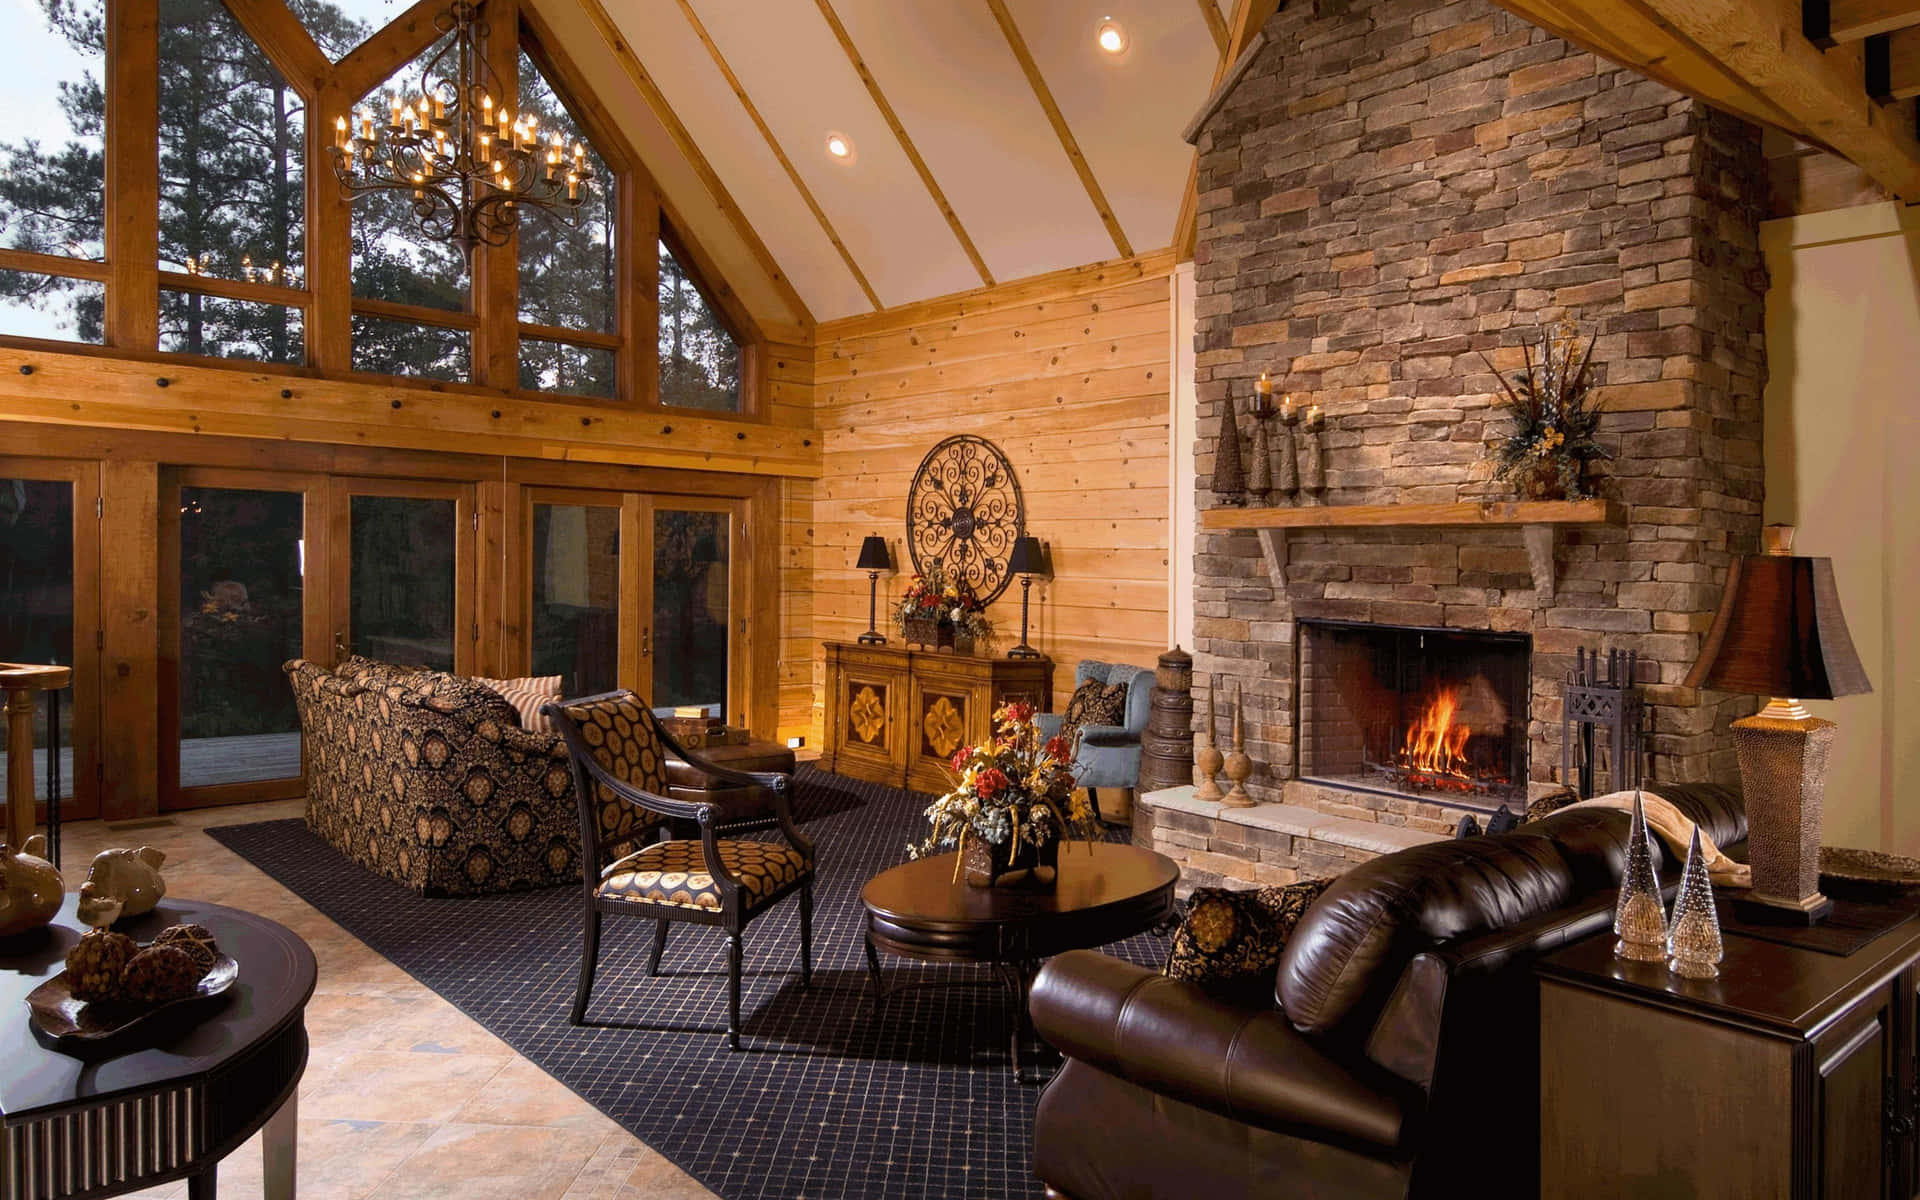 A warm and inviting cozy fire in a fireplace Wallpaper